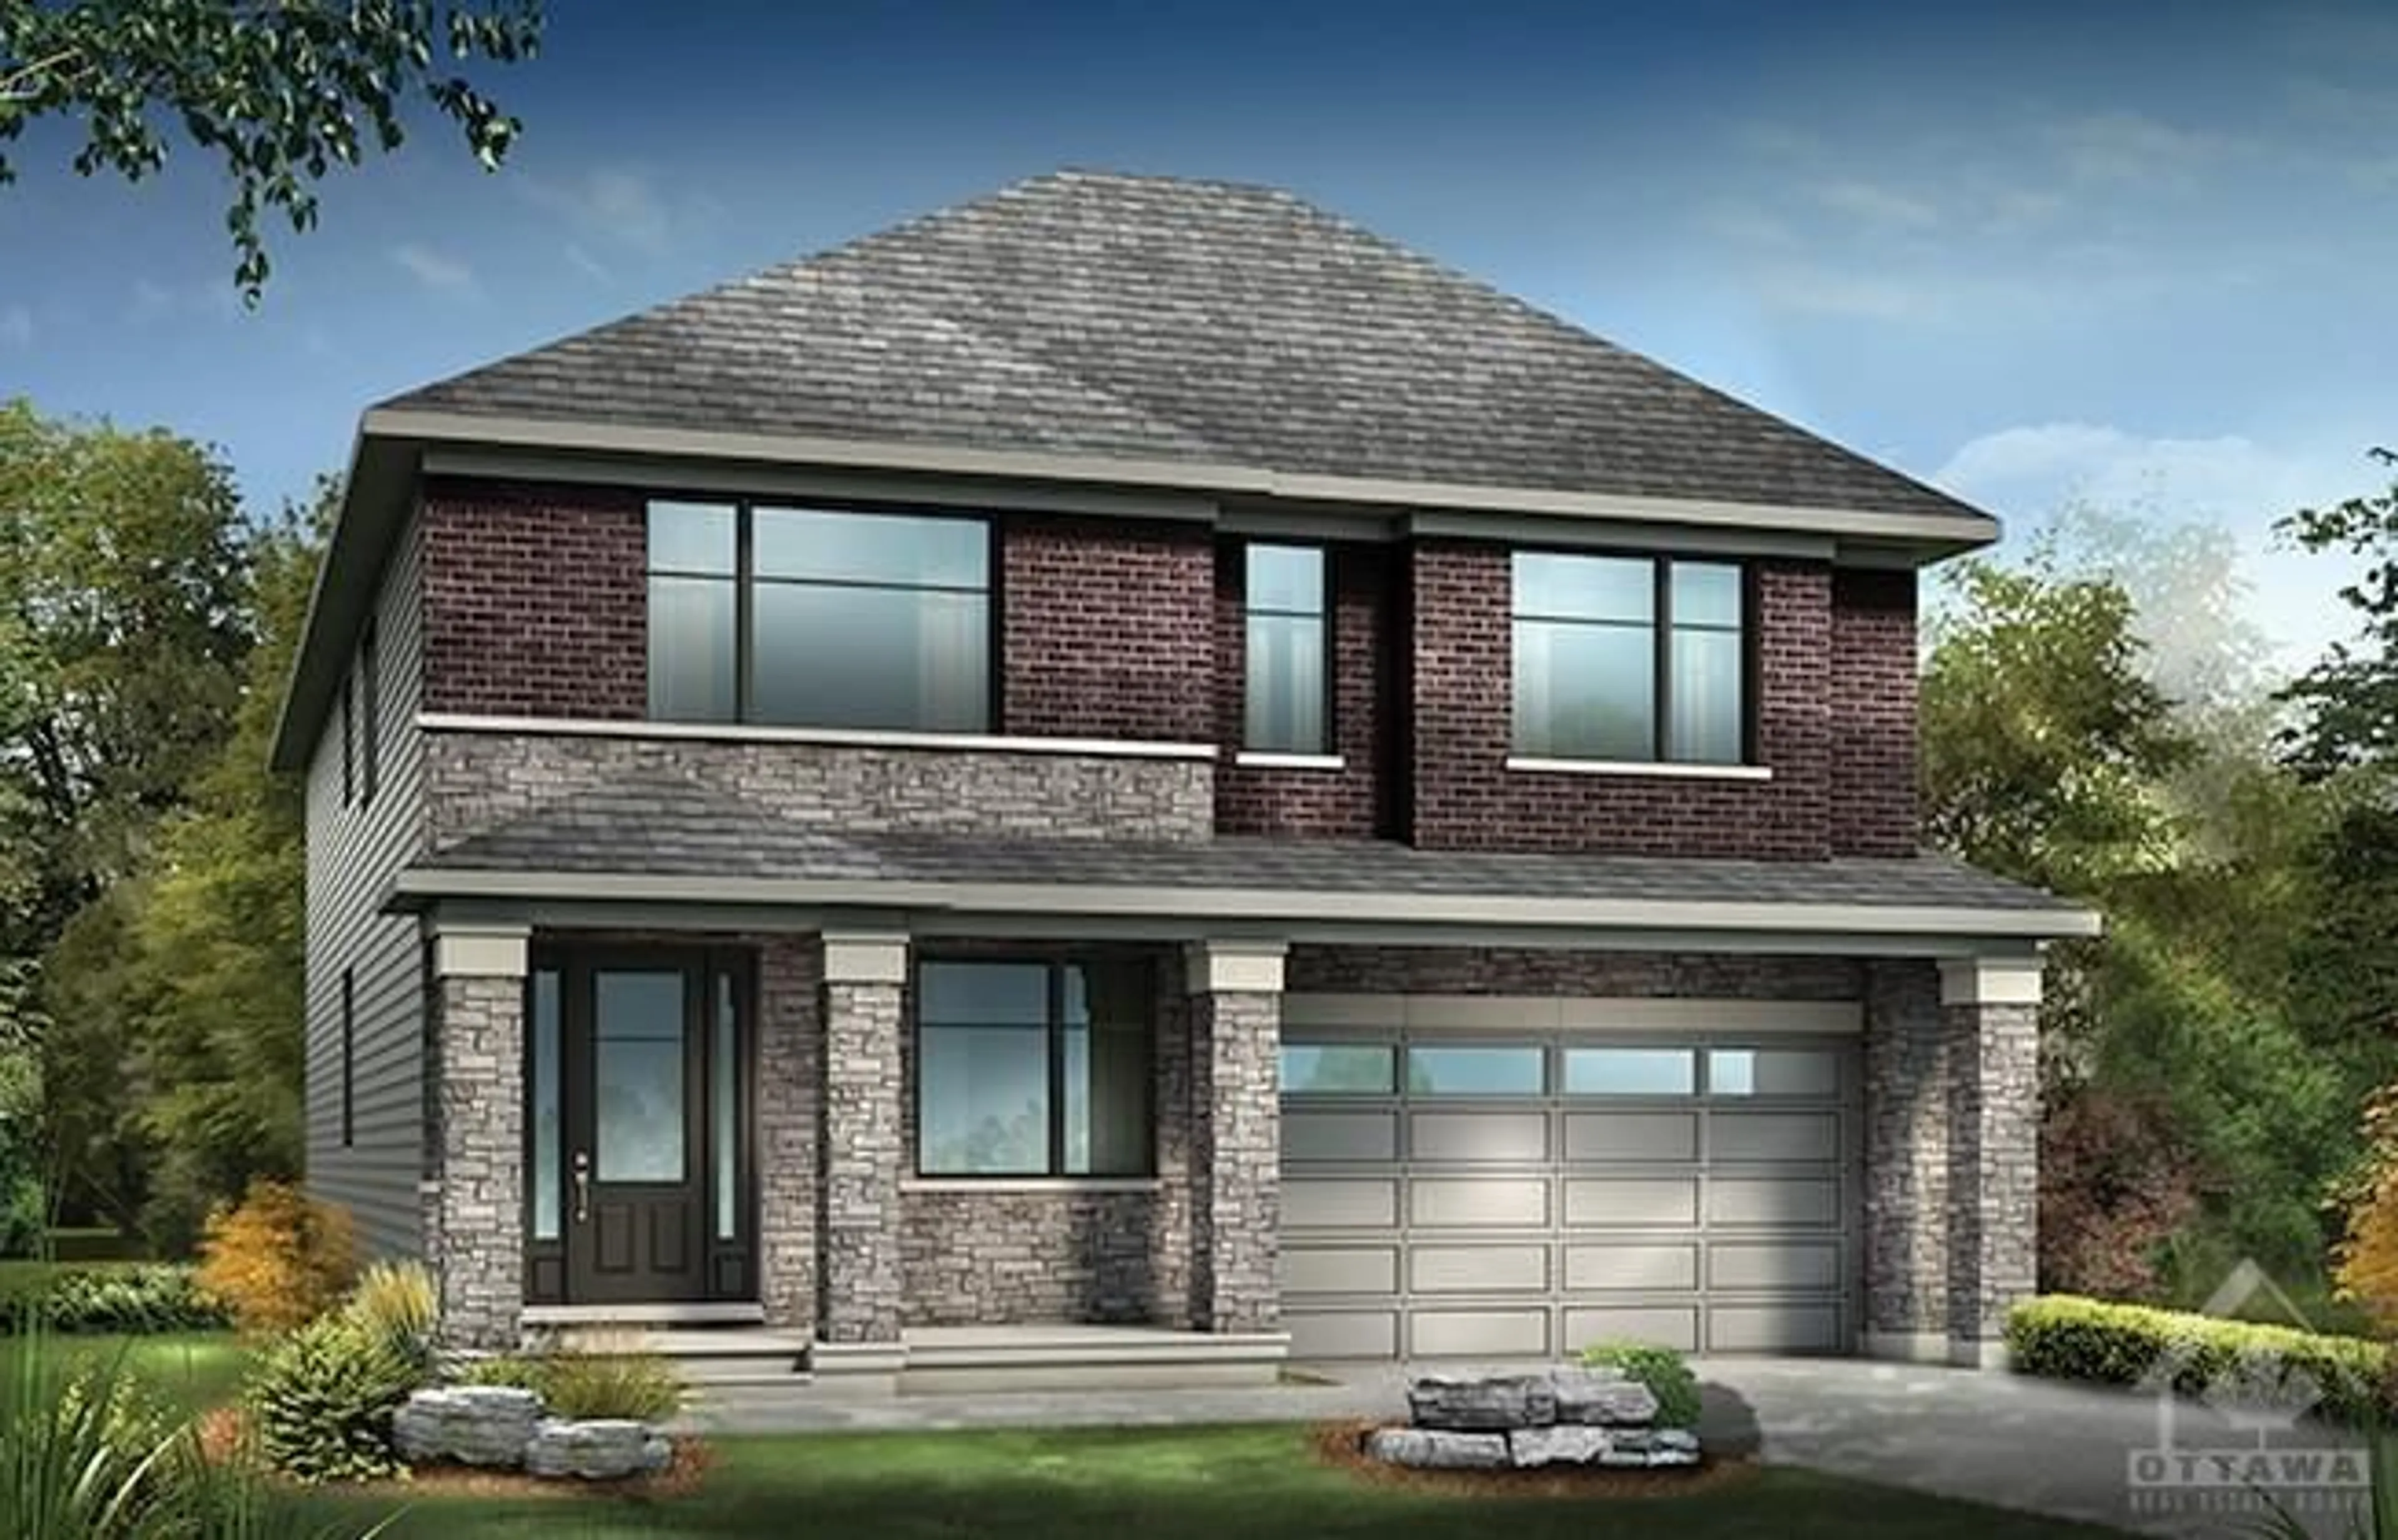 Home with brick exterior material for 645 BRIDGEPORT Ave, Manotick Ontario K4M 0W9